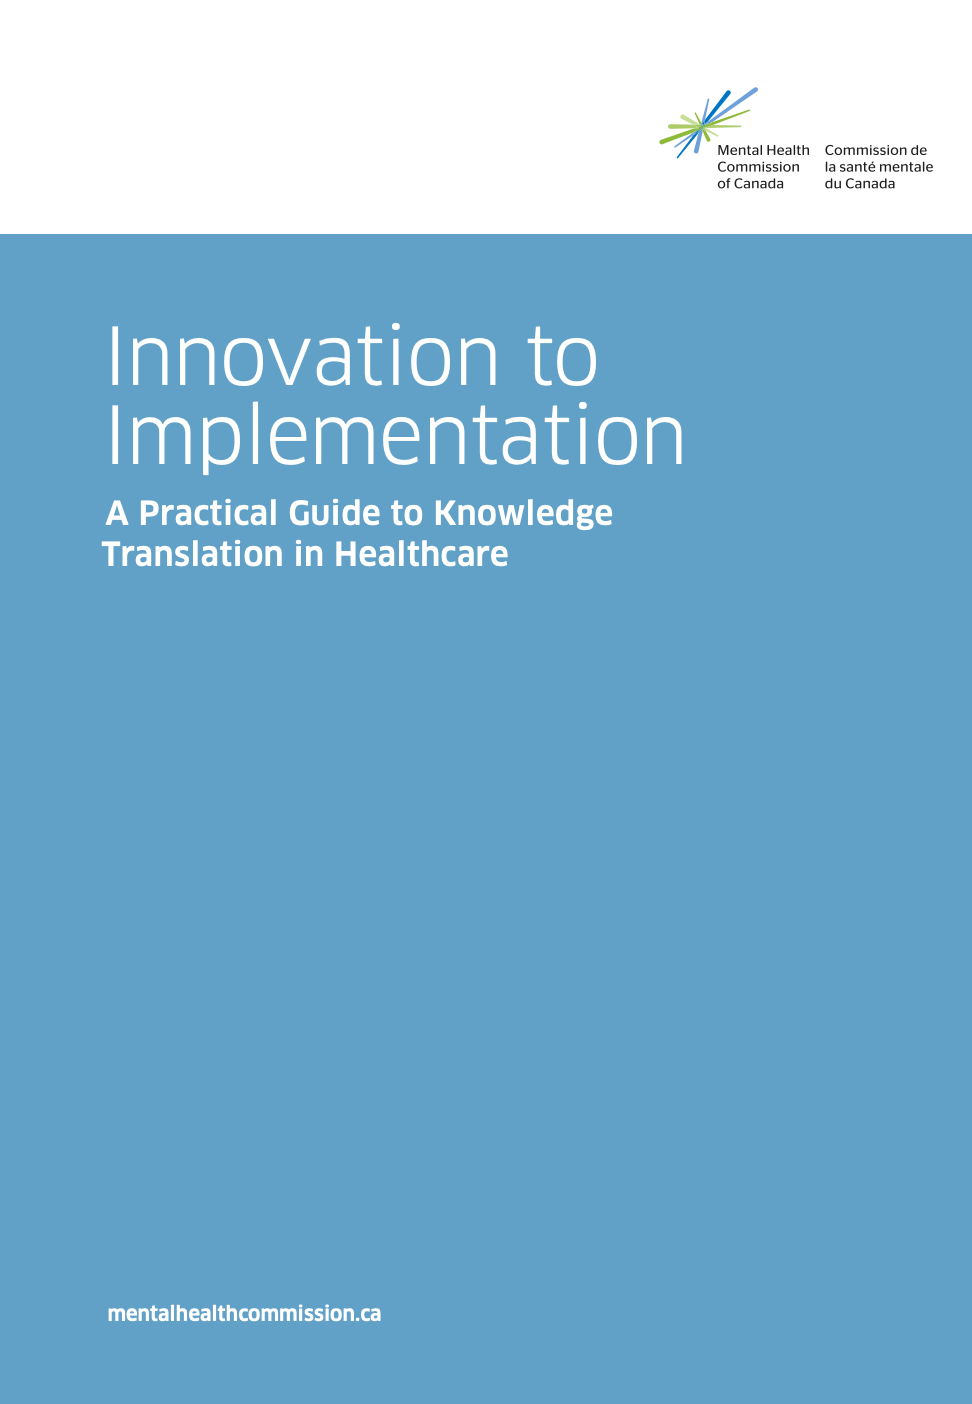 Innovation to Implementation: A Practical Guide to Knowledge Translation in Healthcare